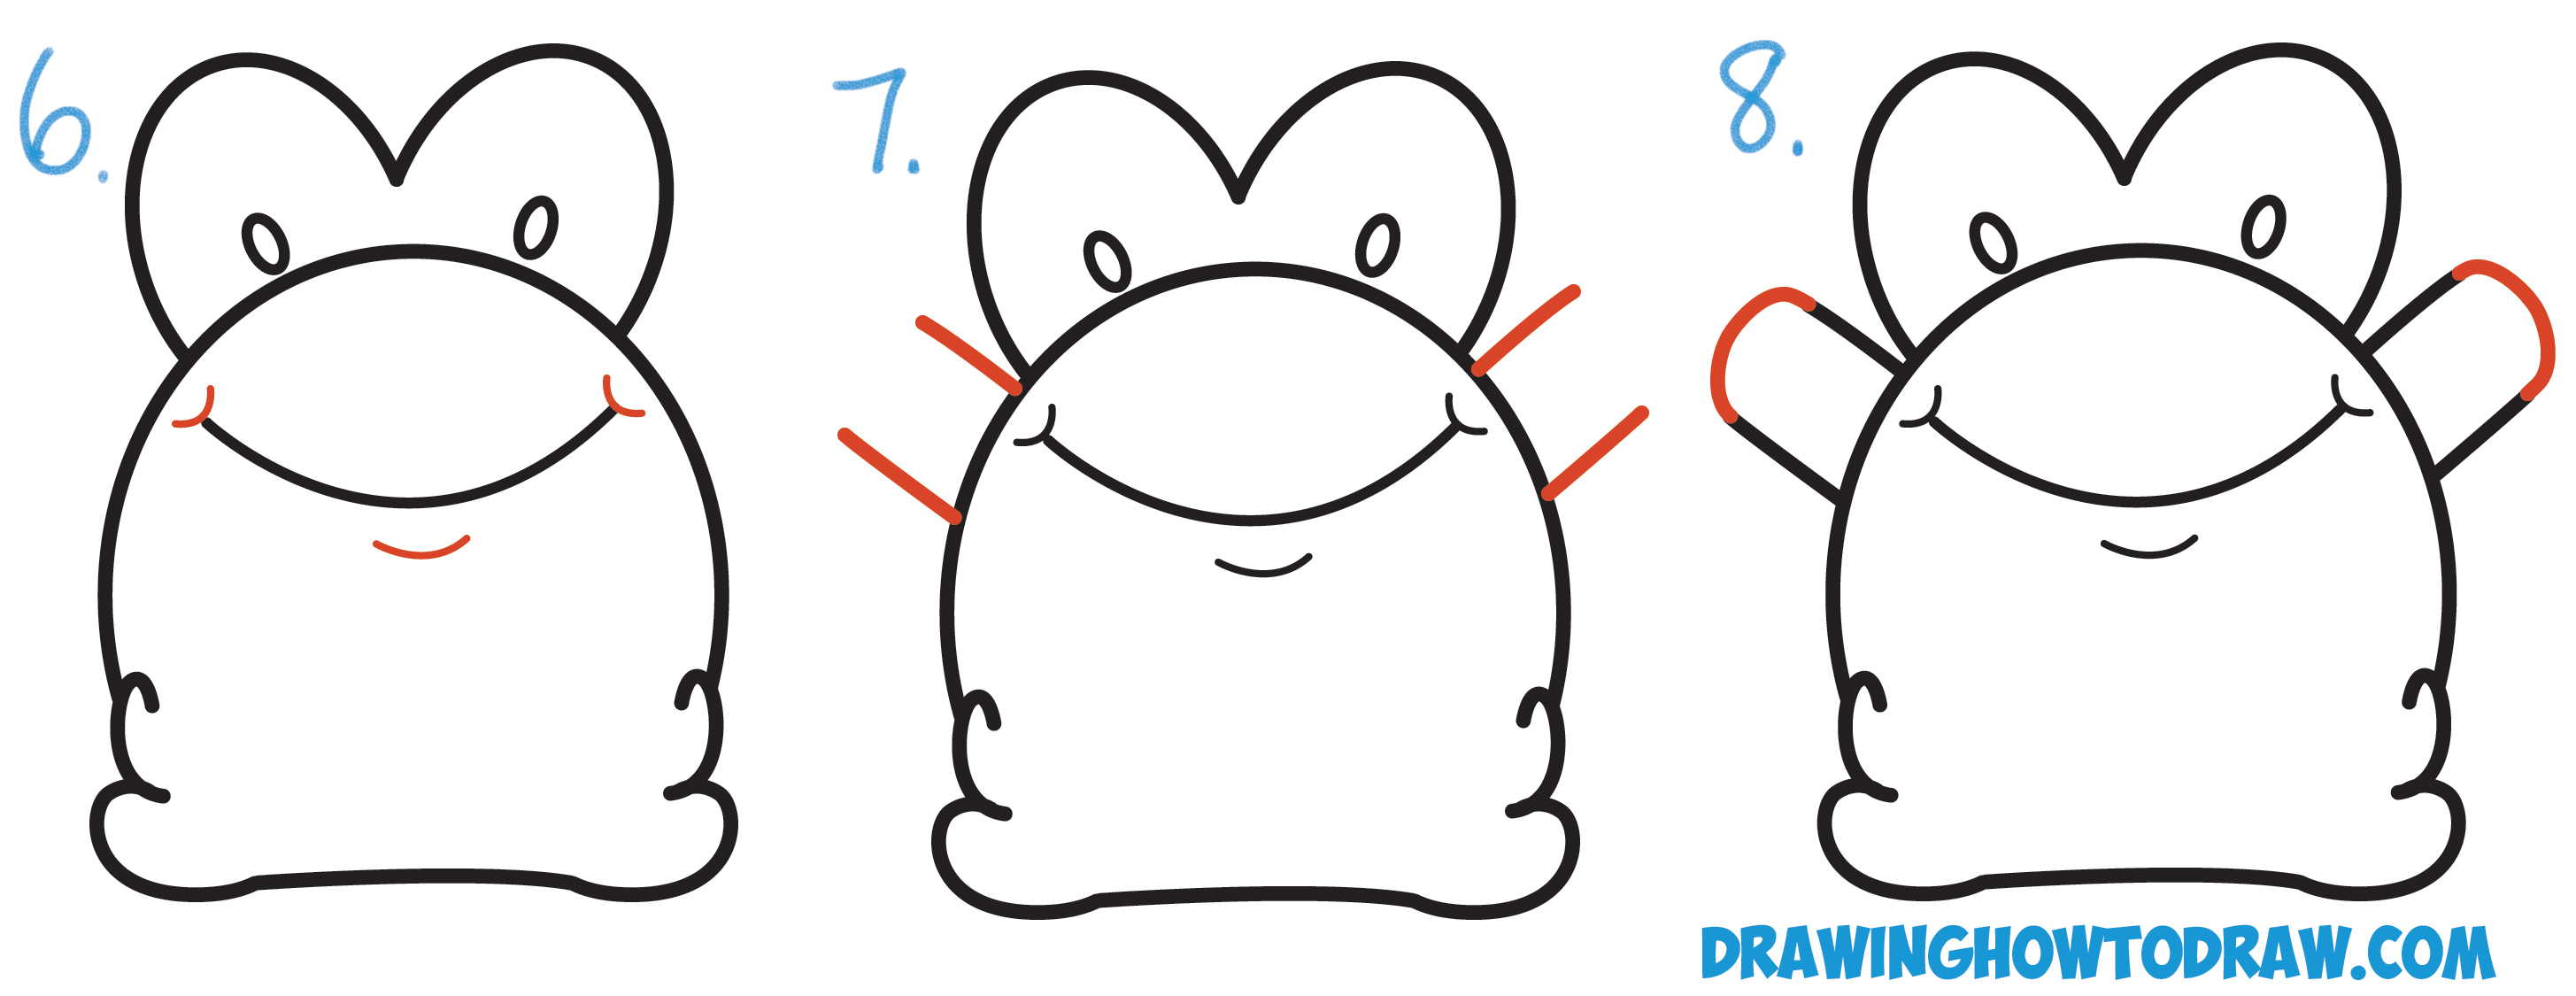 easy drawing, cute frog drawing